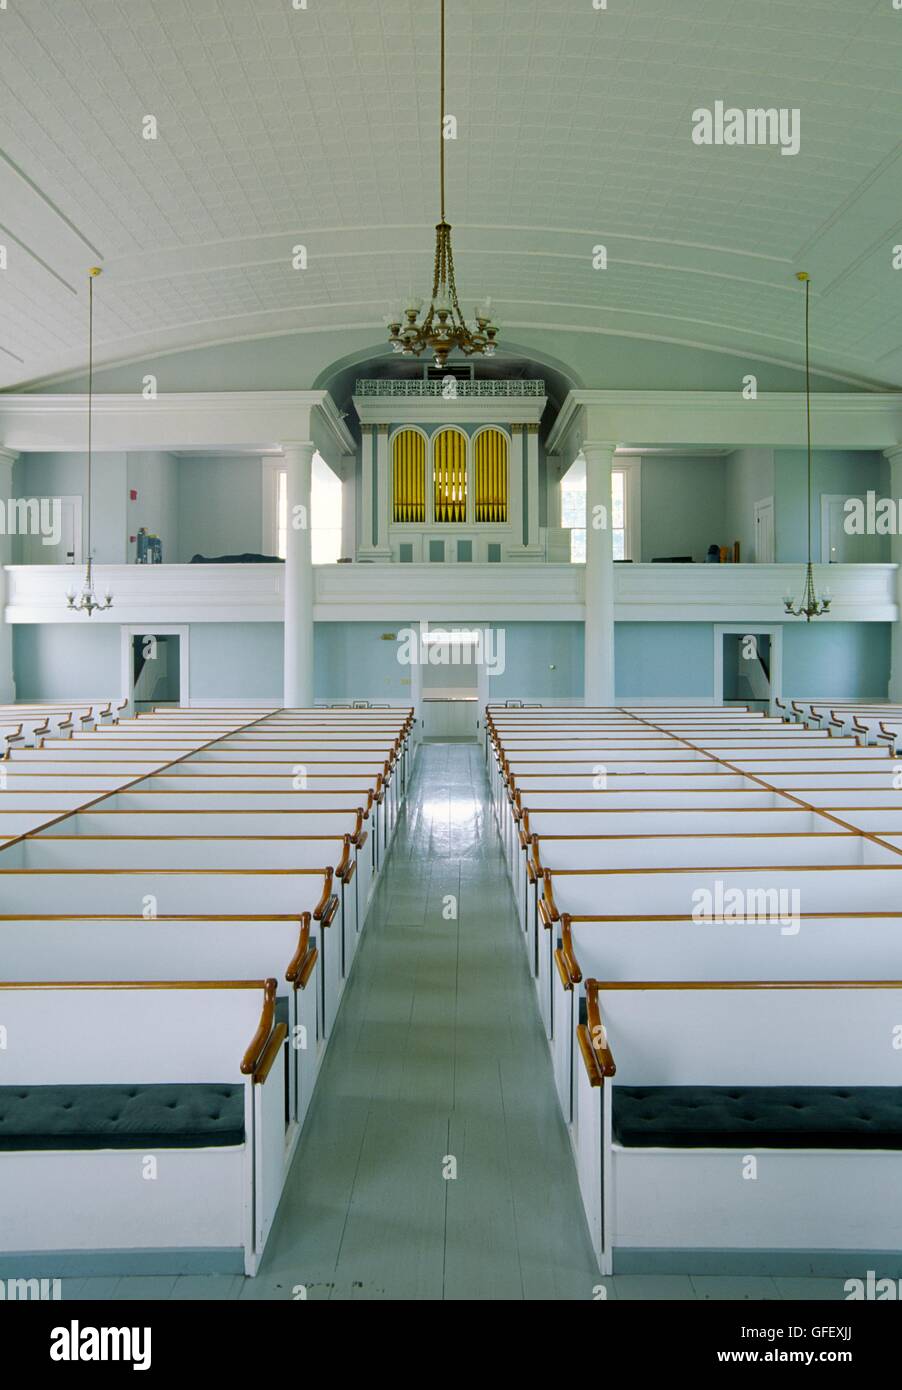 Interior of the Old Whalers Church in Edgartown on the island of Martha's Vineyard off Cape Cod, Massachusetts, New England, USA Stock Photo